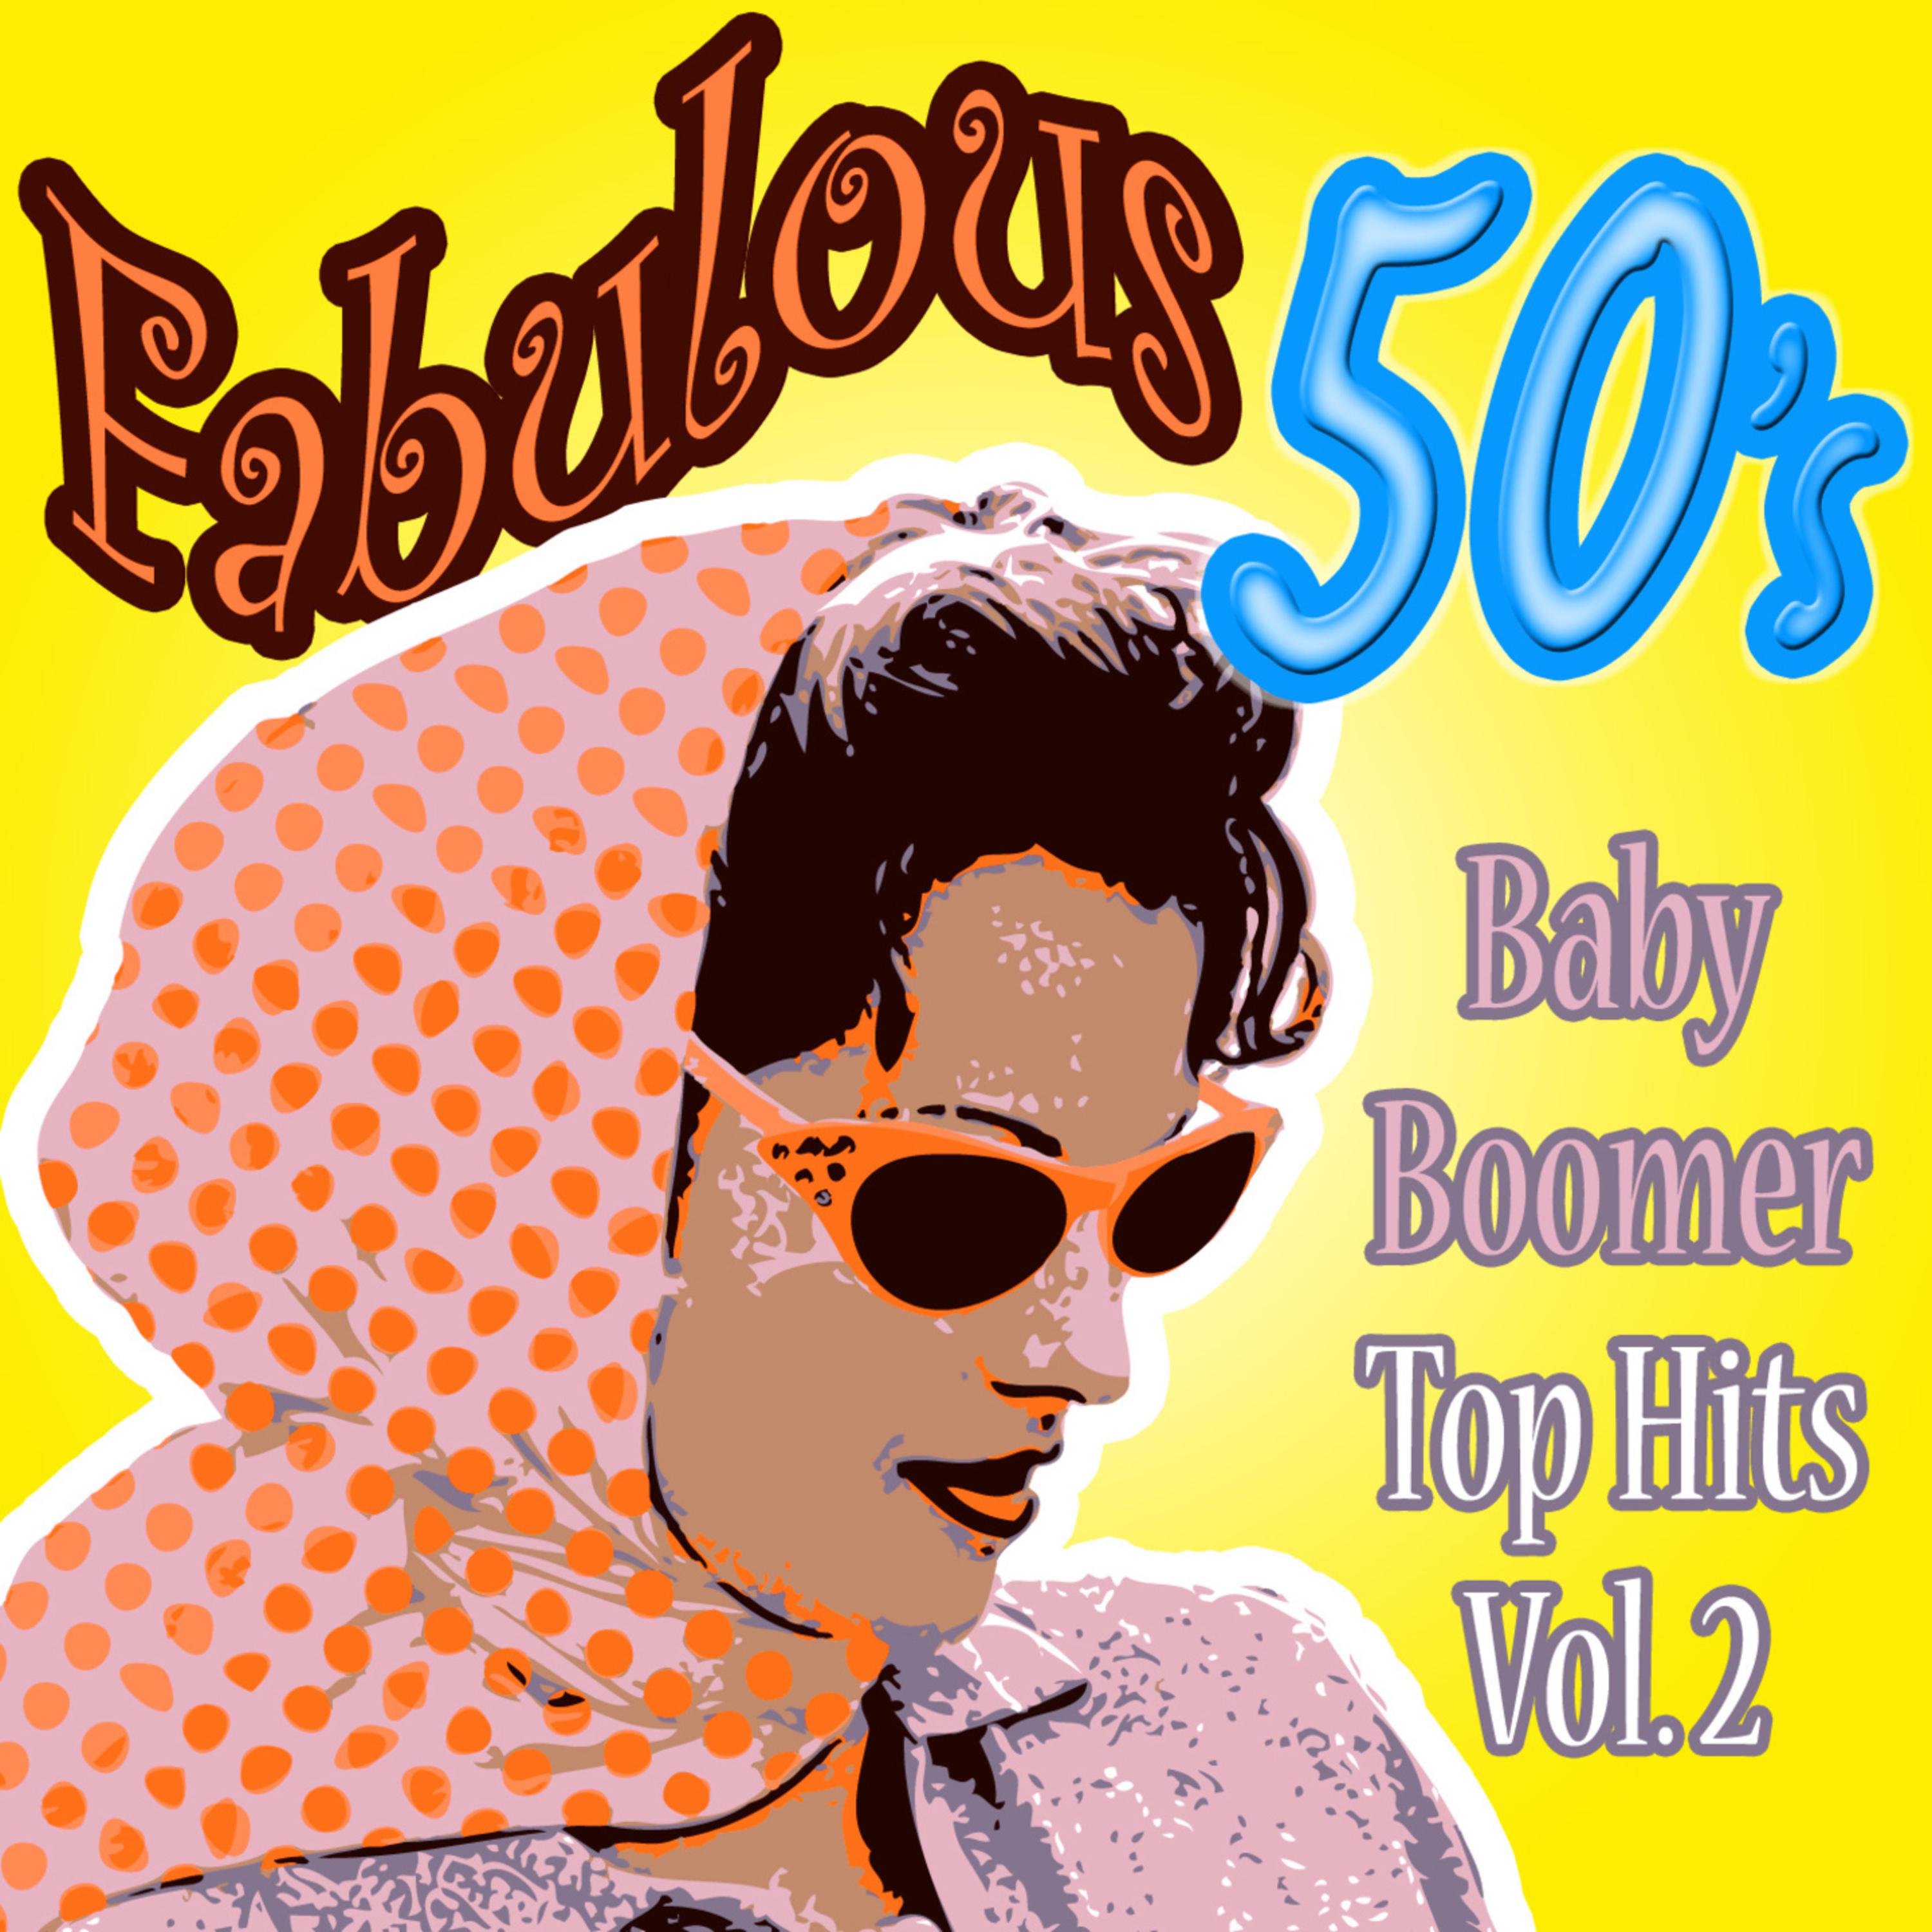 Fabulous 50s Baby Boomers Top Hits Vol 2